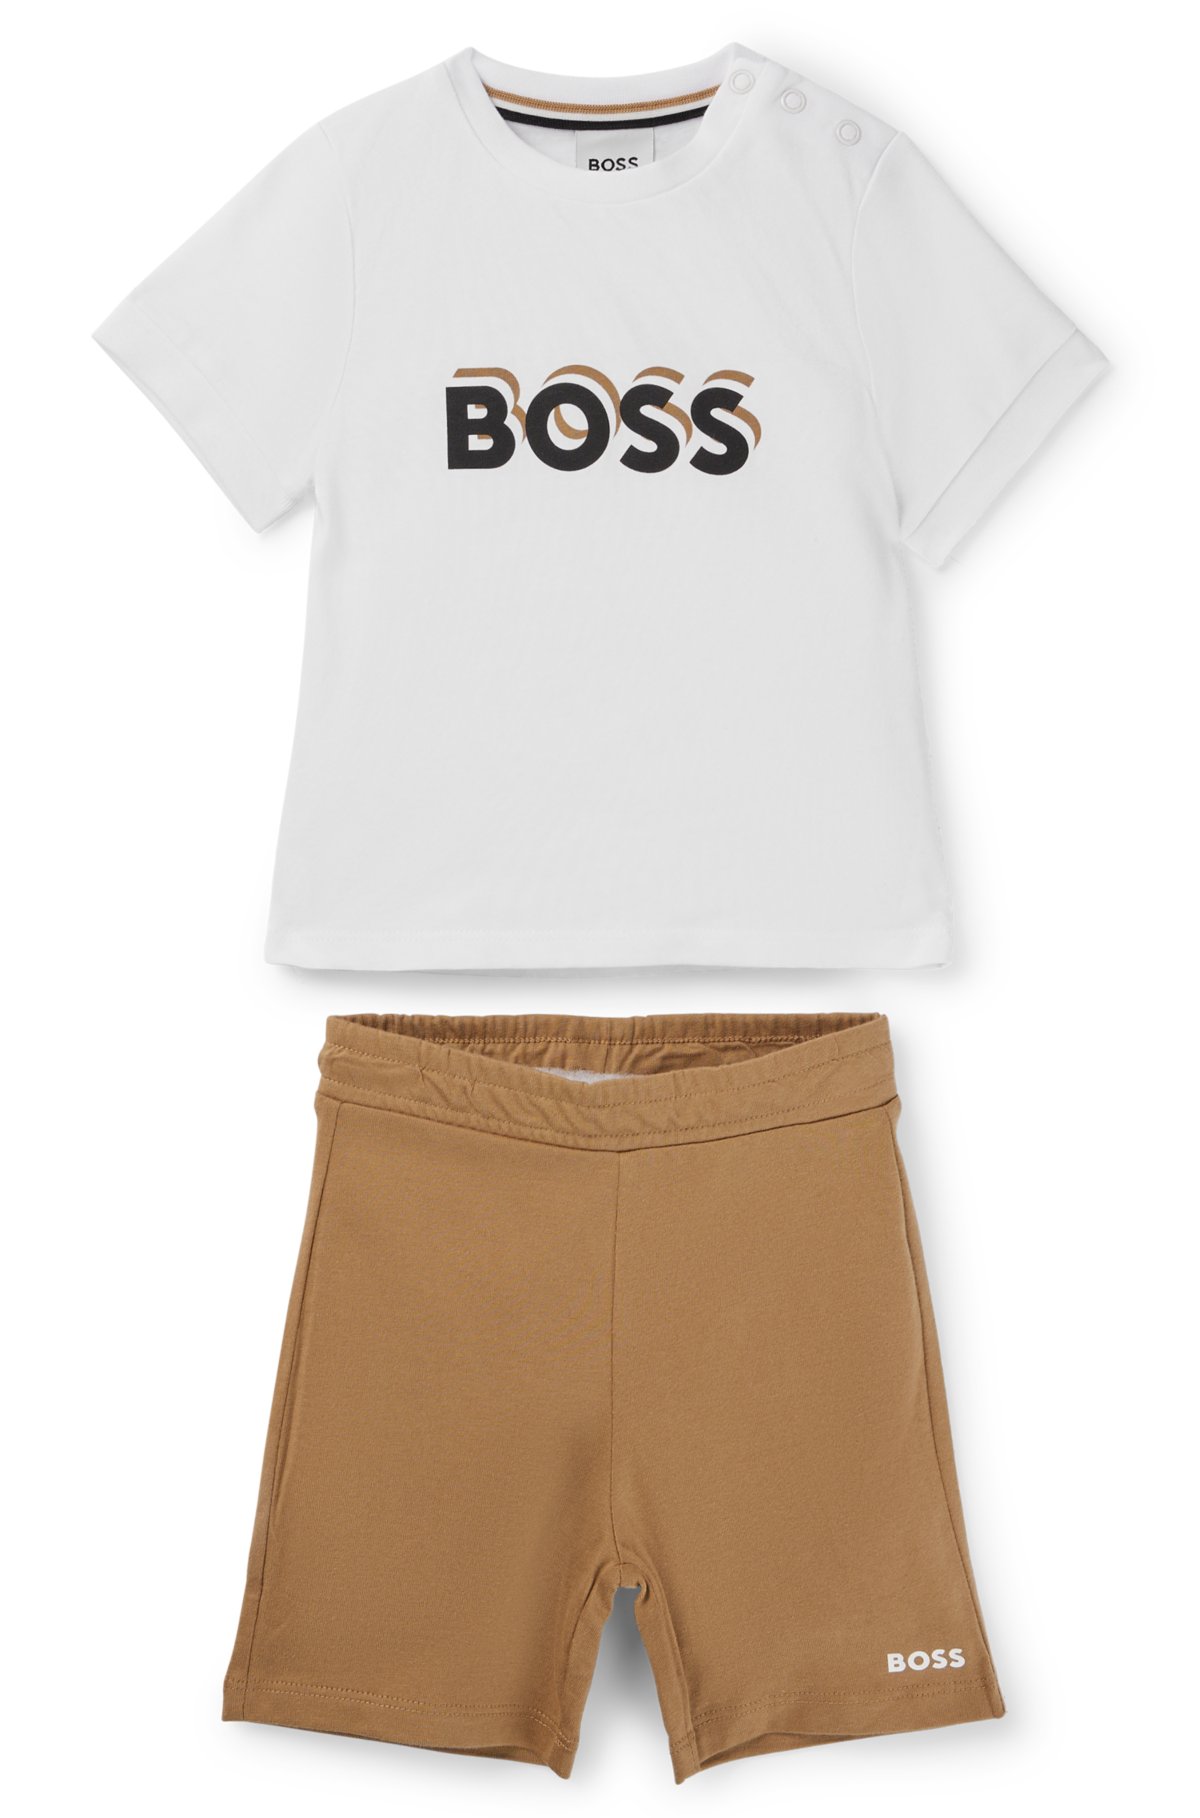 BOSS - Kids' cotton T-shirt and shorts set with logo details